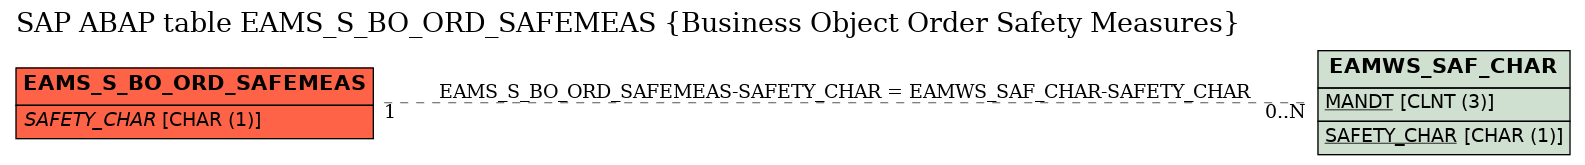 E-R Diagram for table EAMS_S_BO_ORD_SAFEMEAS (Business Object Order Safety Measures)